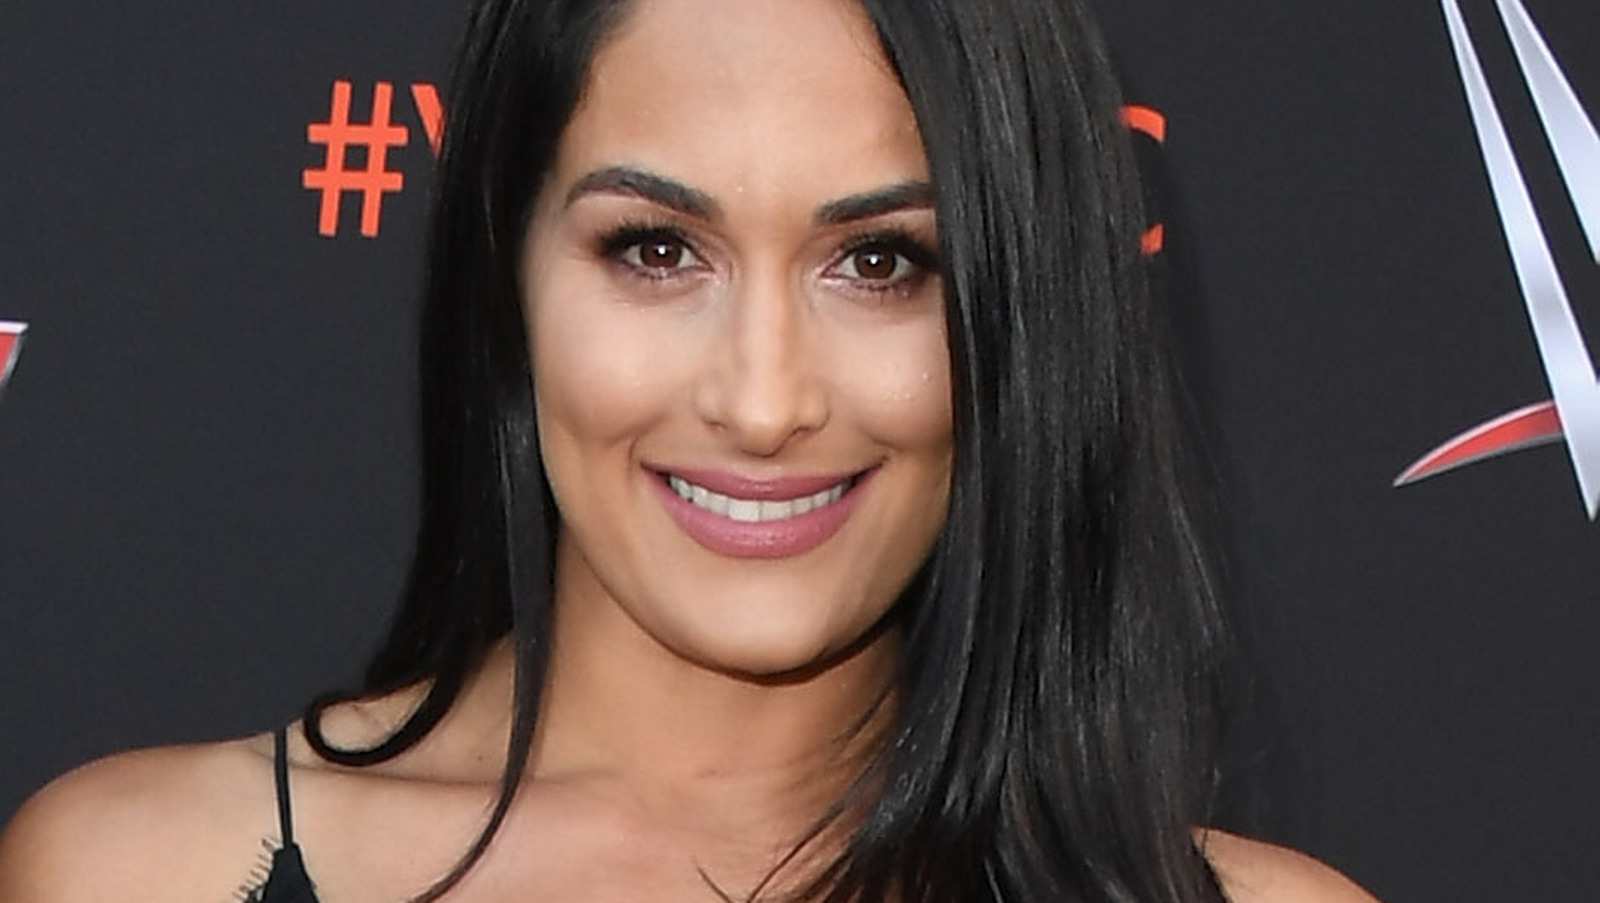 Nikki and Brie Bella Are Exiting WWE and Ditching Their Ring Names